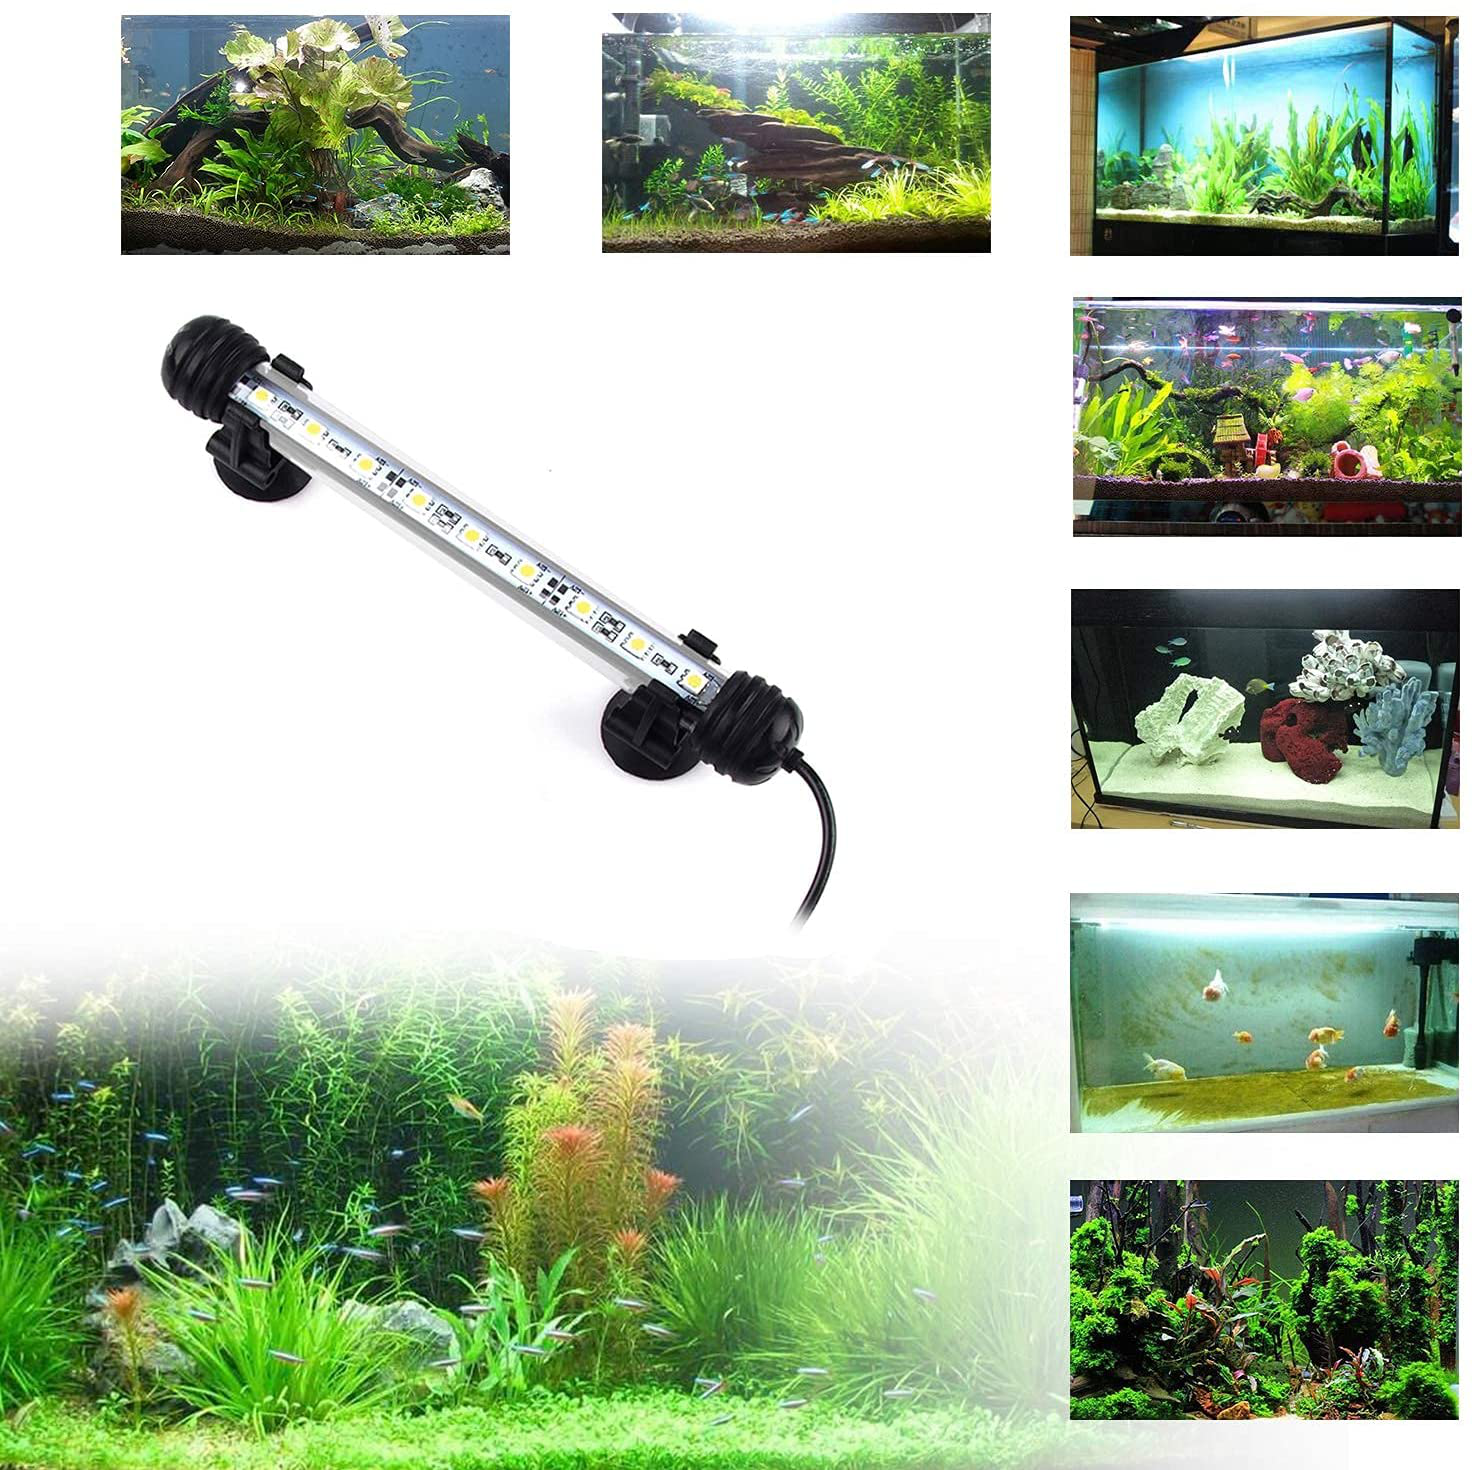 LED Aquarium Light, Underwater Fish Tank Lights with Timer and Dimmable IP68 Waterproof Submersible LED Lighting, White (Upgrated 7.5 Inch)